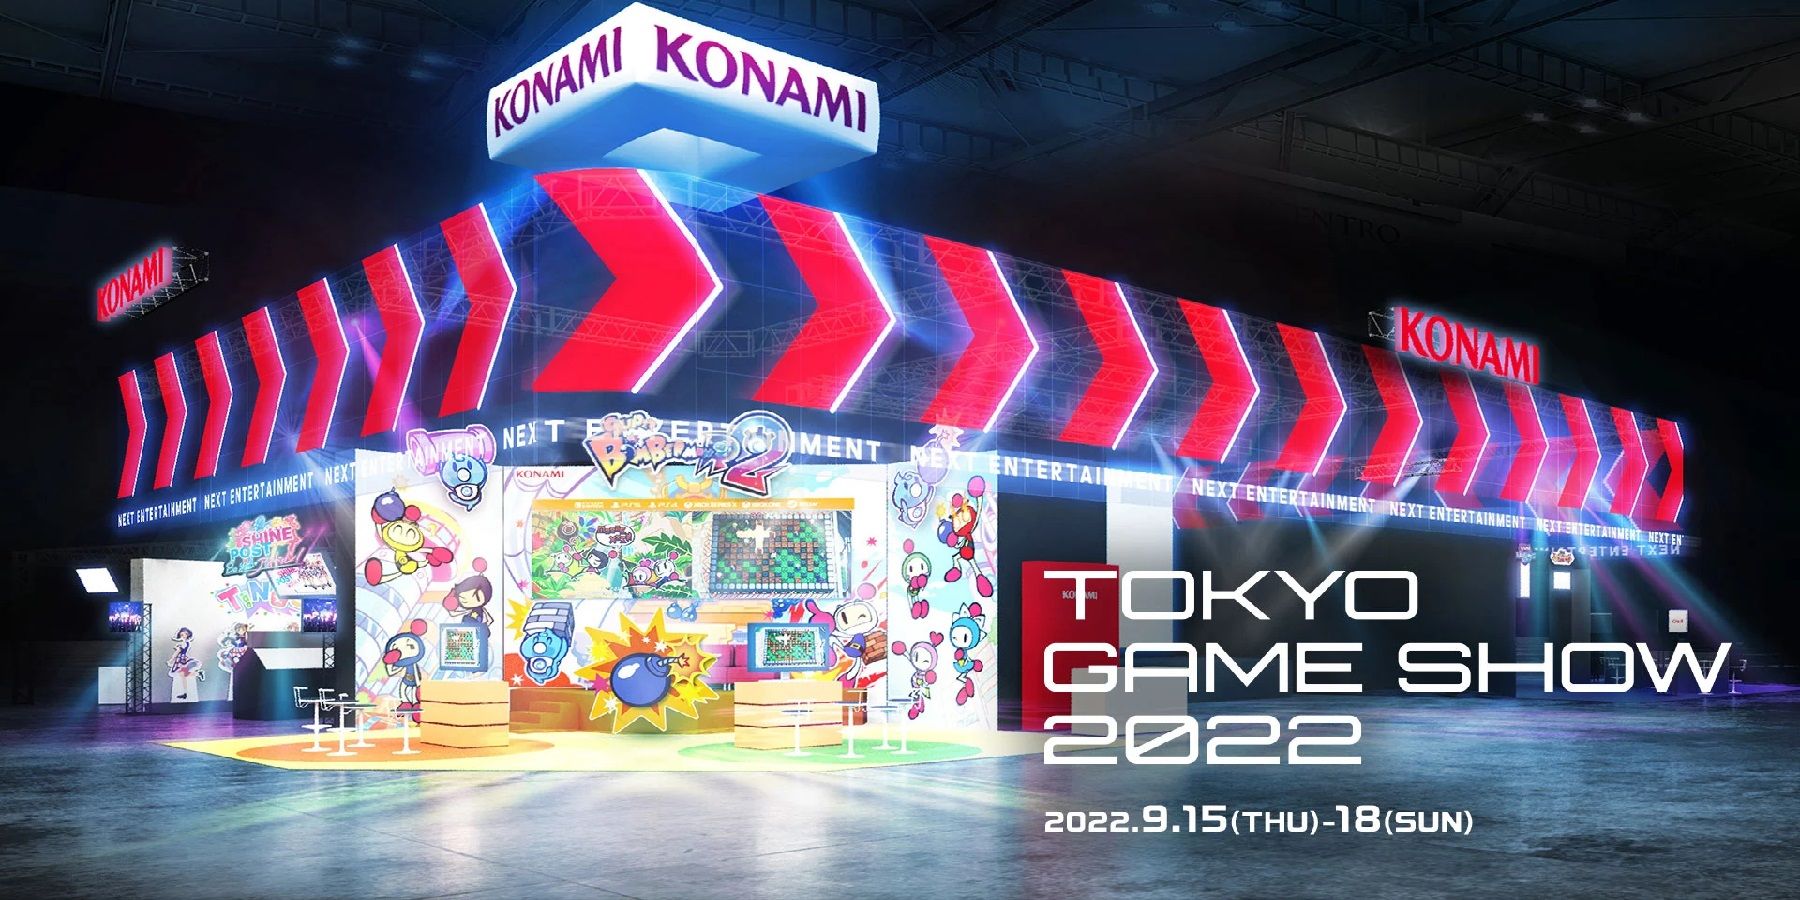 Konami Plans To Announce New Game from 'Beloved' Series at Tokyo Game Show